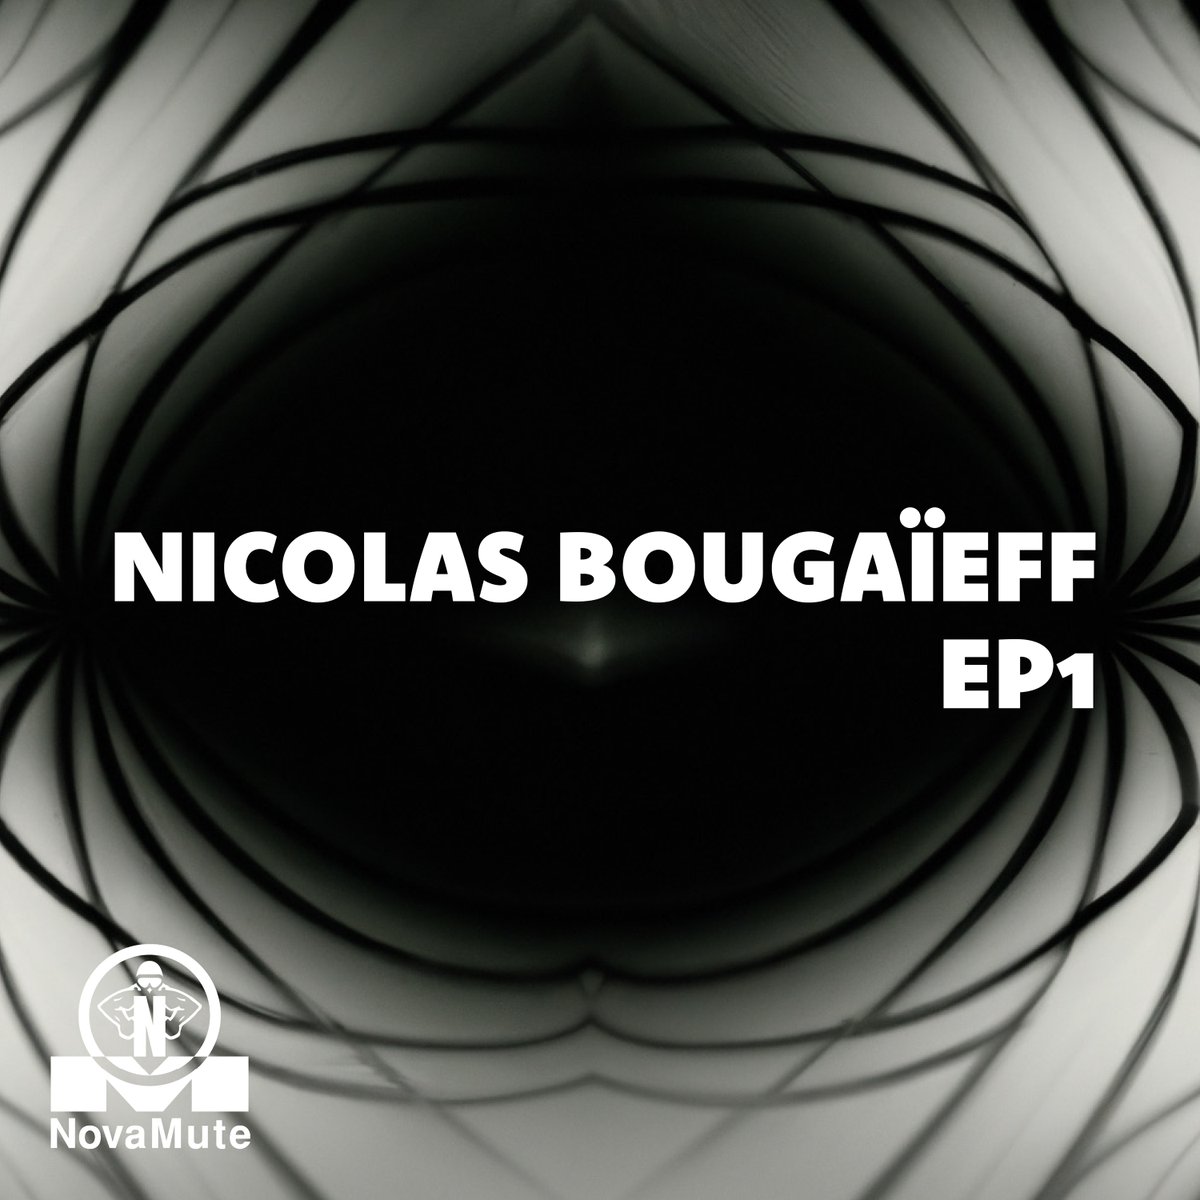 Nicolas Bougaïeff (@nbougaieff) stellar new techno series, EP1, available now on @beatport. Includes 'Primal Express', 'Obviate Thought', and 'Concrete Love'. ▶️ mute.ffm.to/nb_ep1